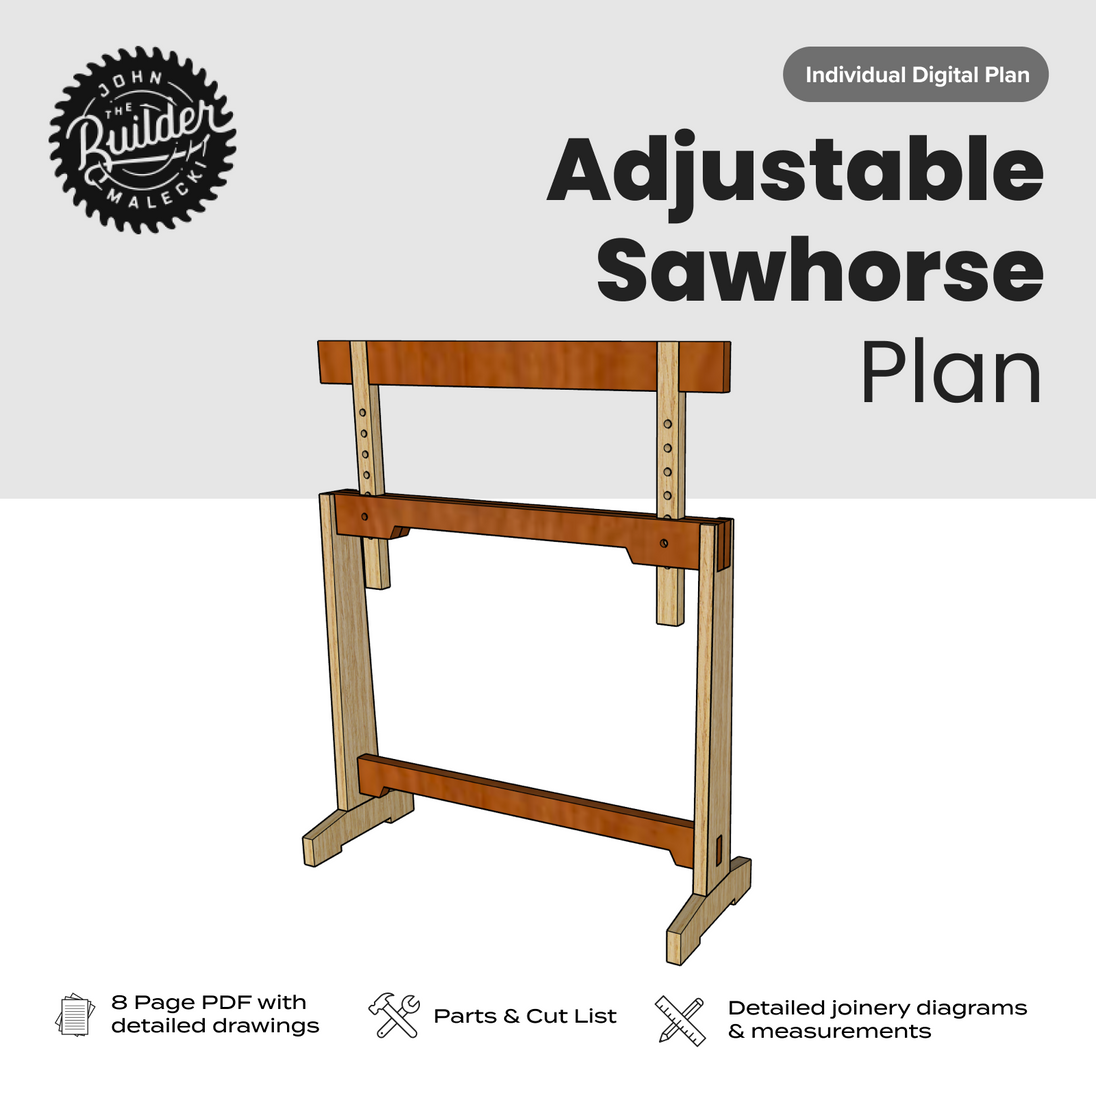 Make Adjustable Sawhorses [+ With PLANS] 